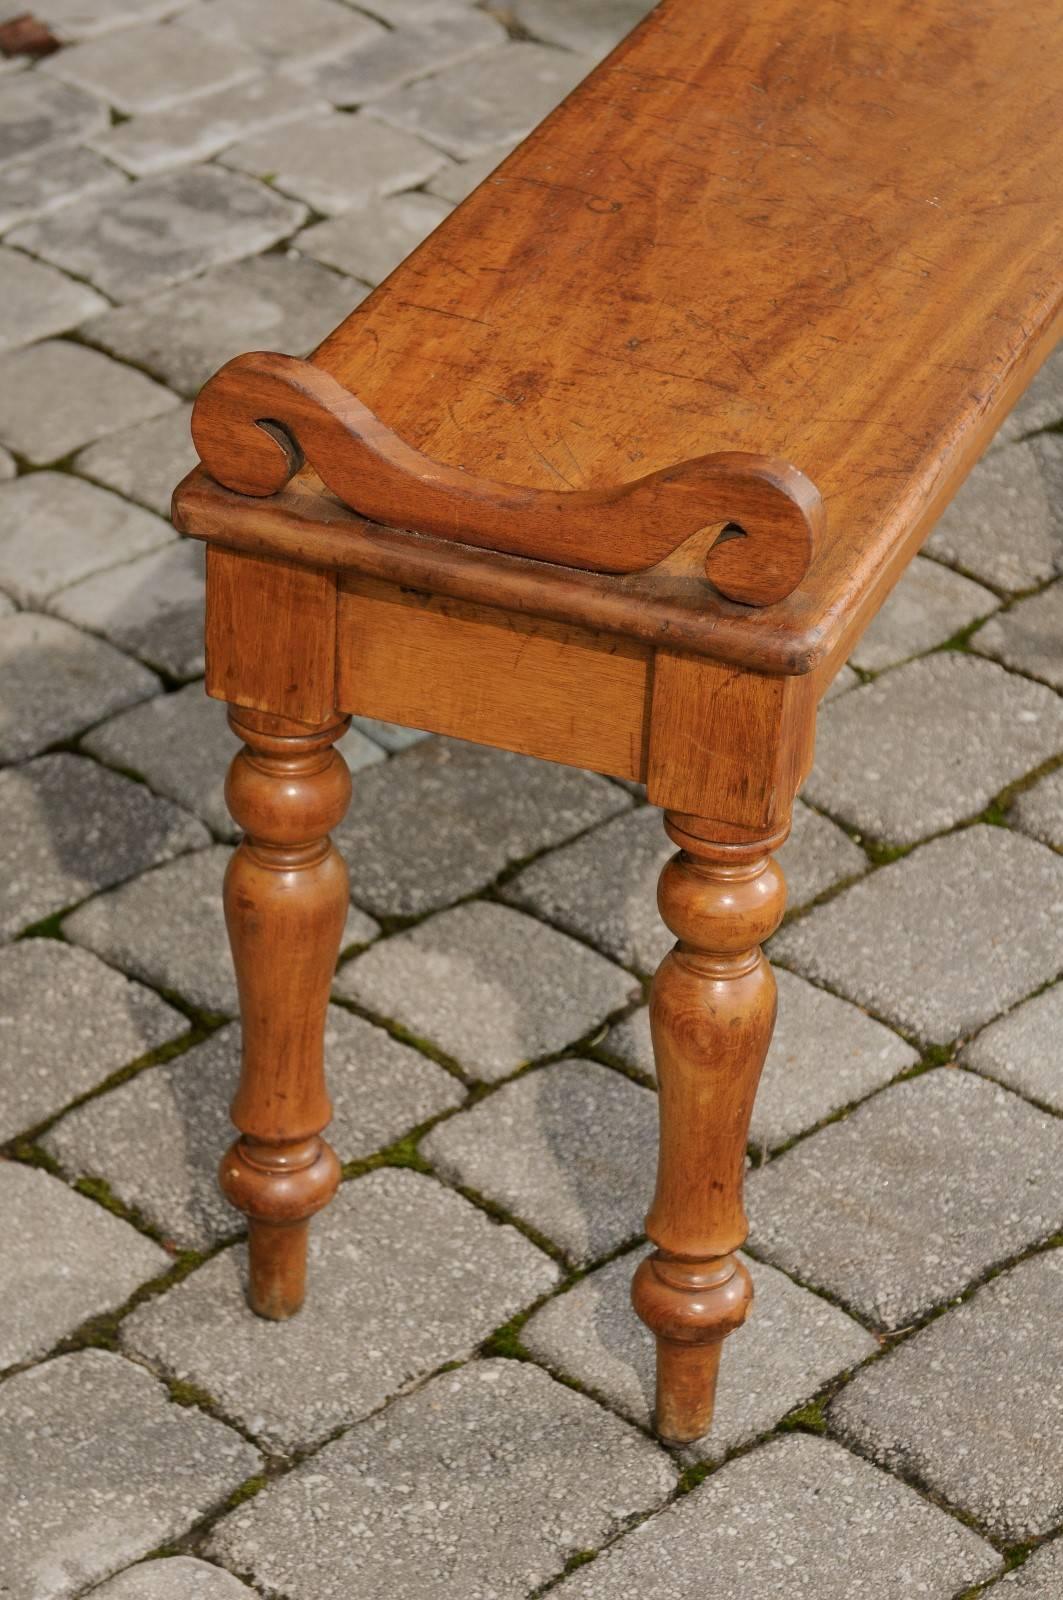 20th Century English Petite Oak Hall Bench with Turned Legs and Curly Arm Supports circa 1900